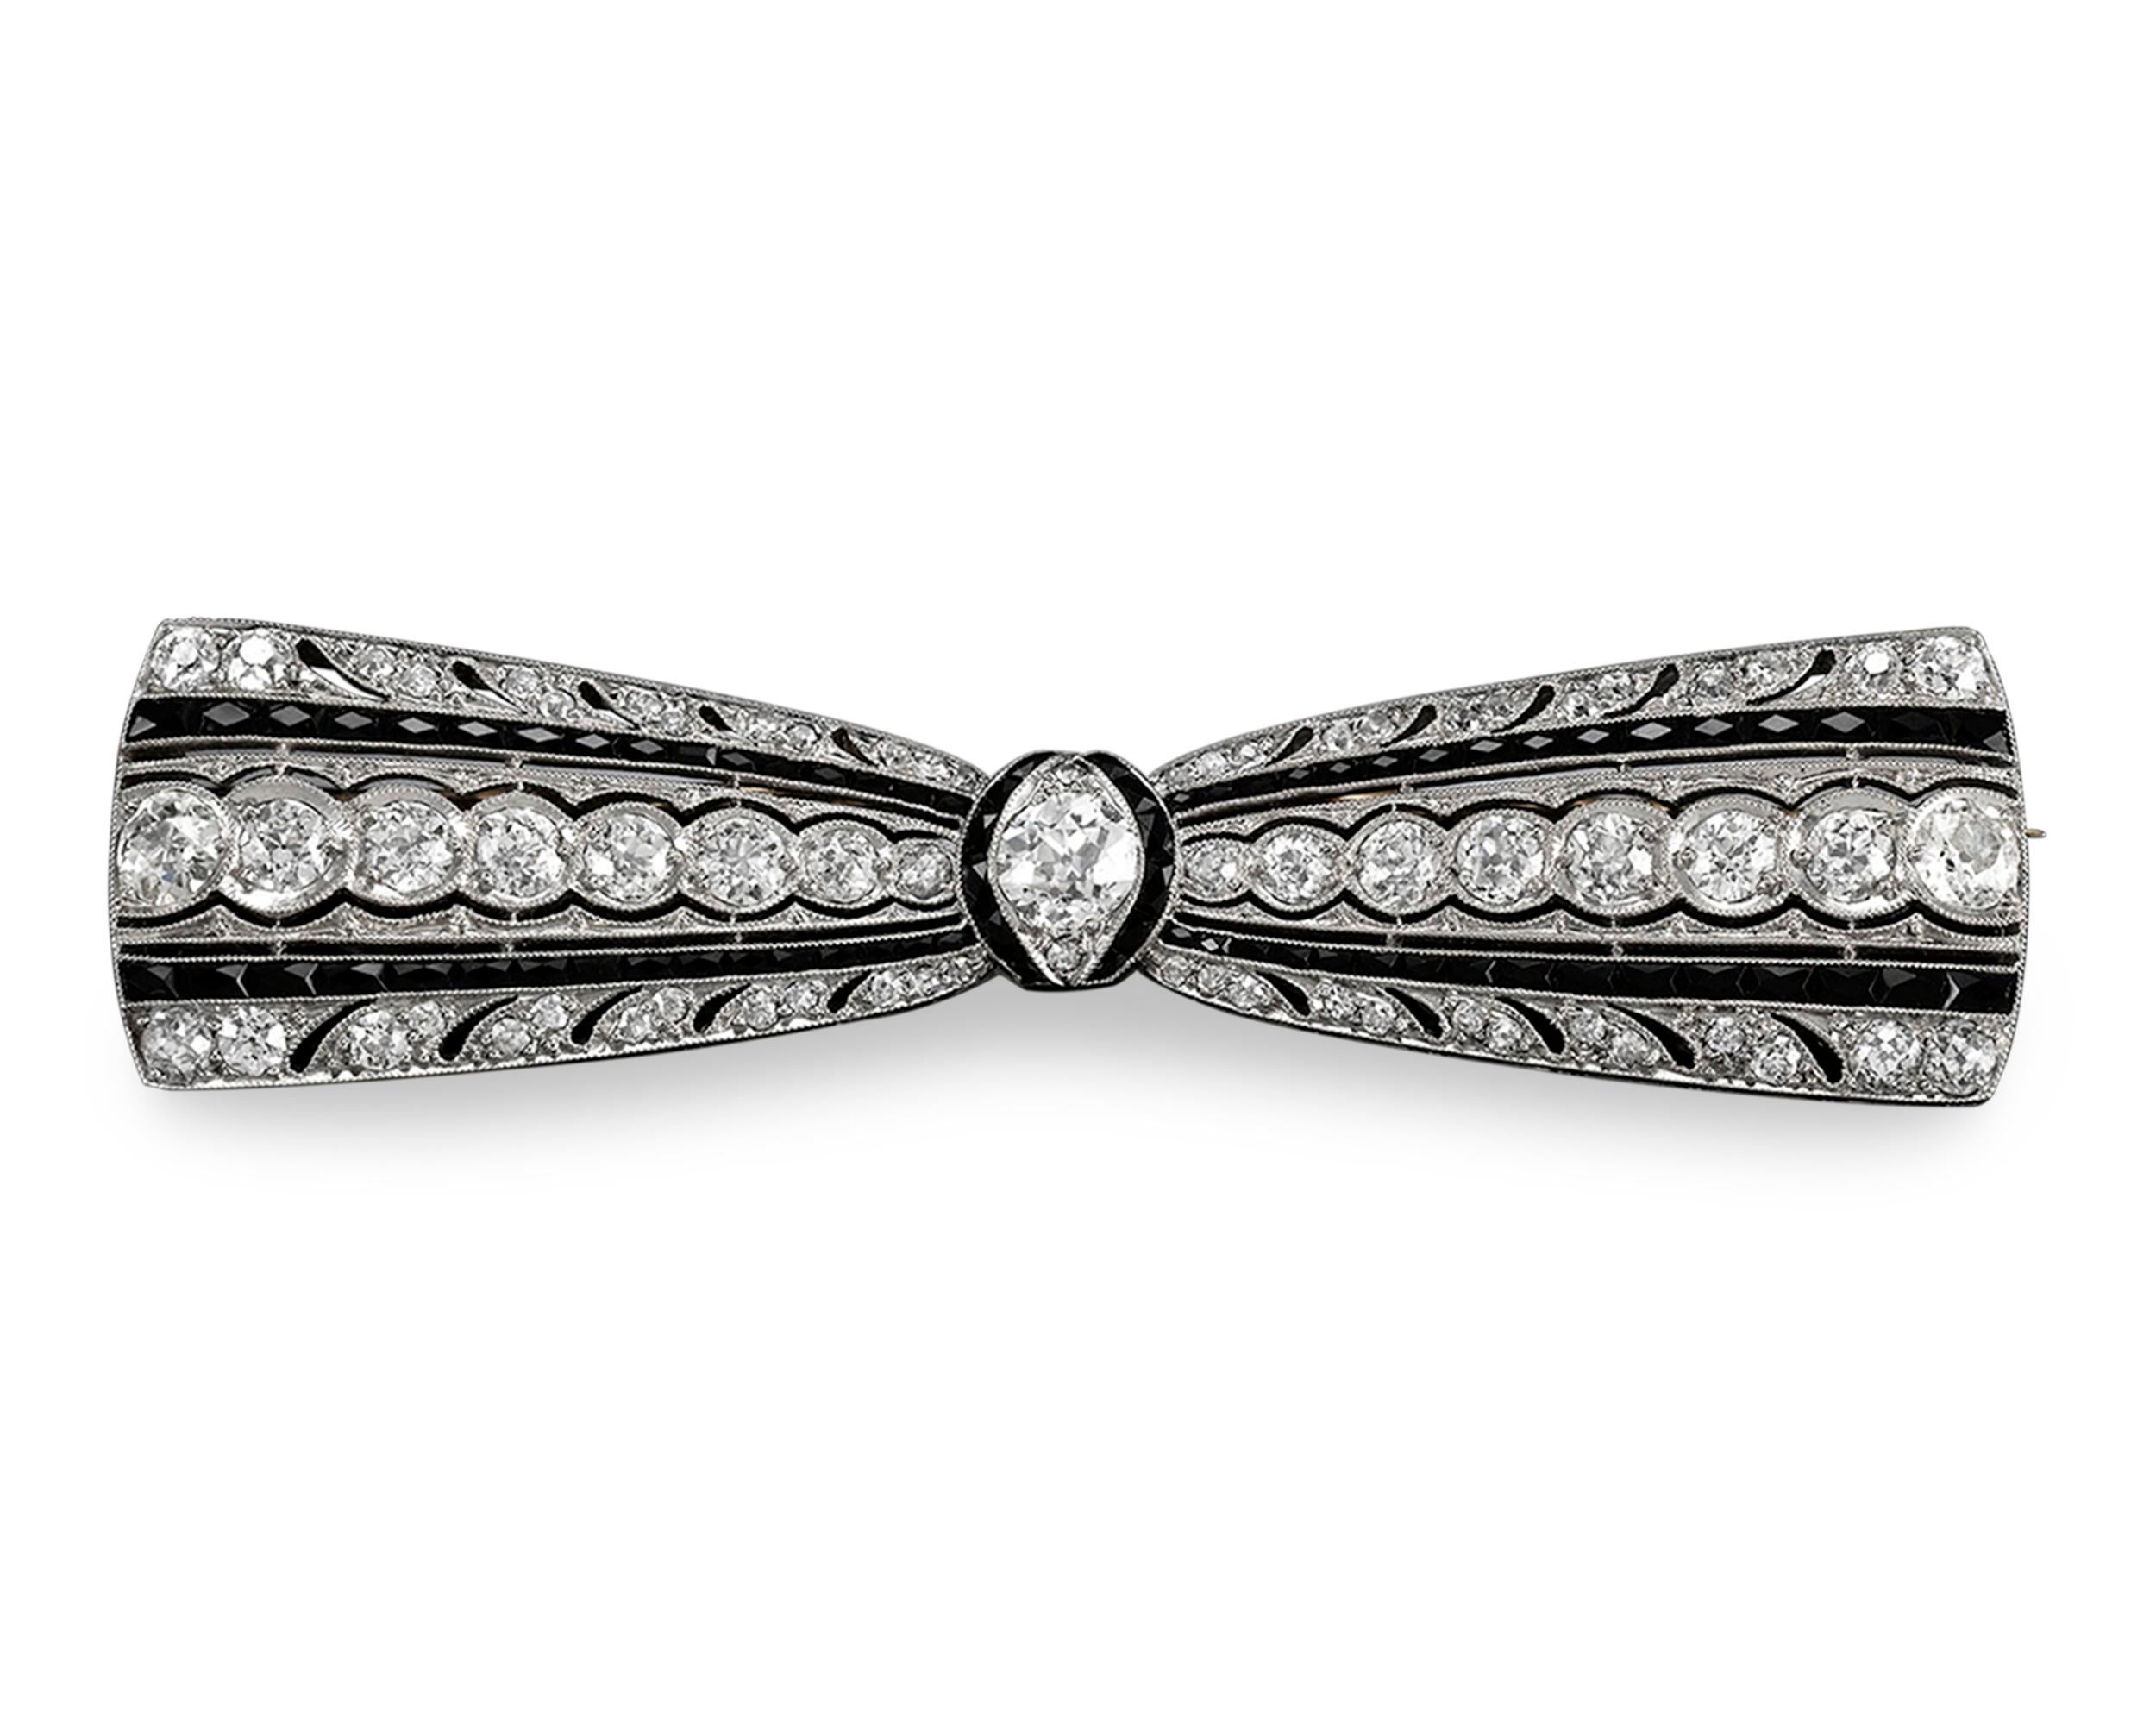 Seventy-one sparkling white diamonds and faceted black onyx make an elegant statement in this Art Deco-period 